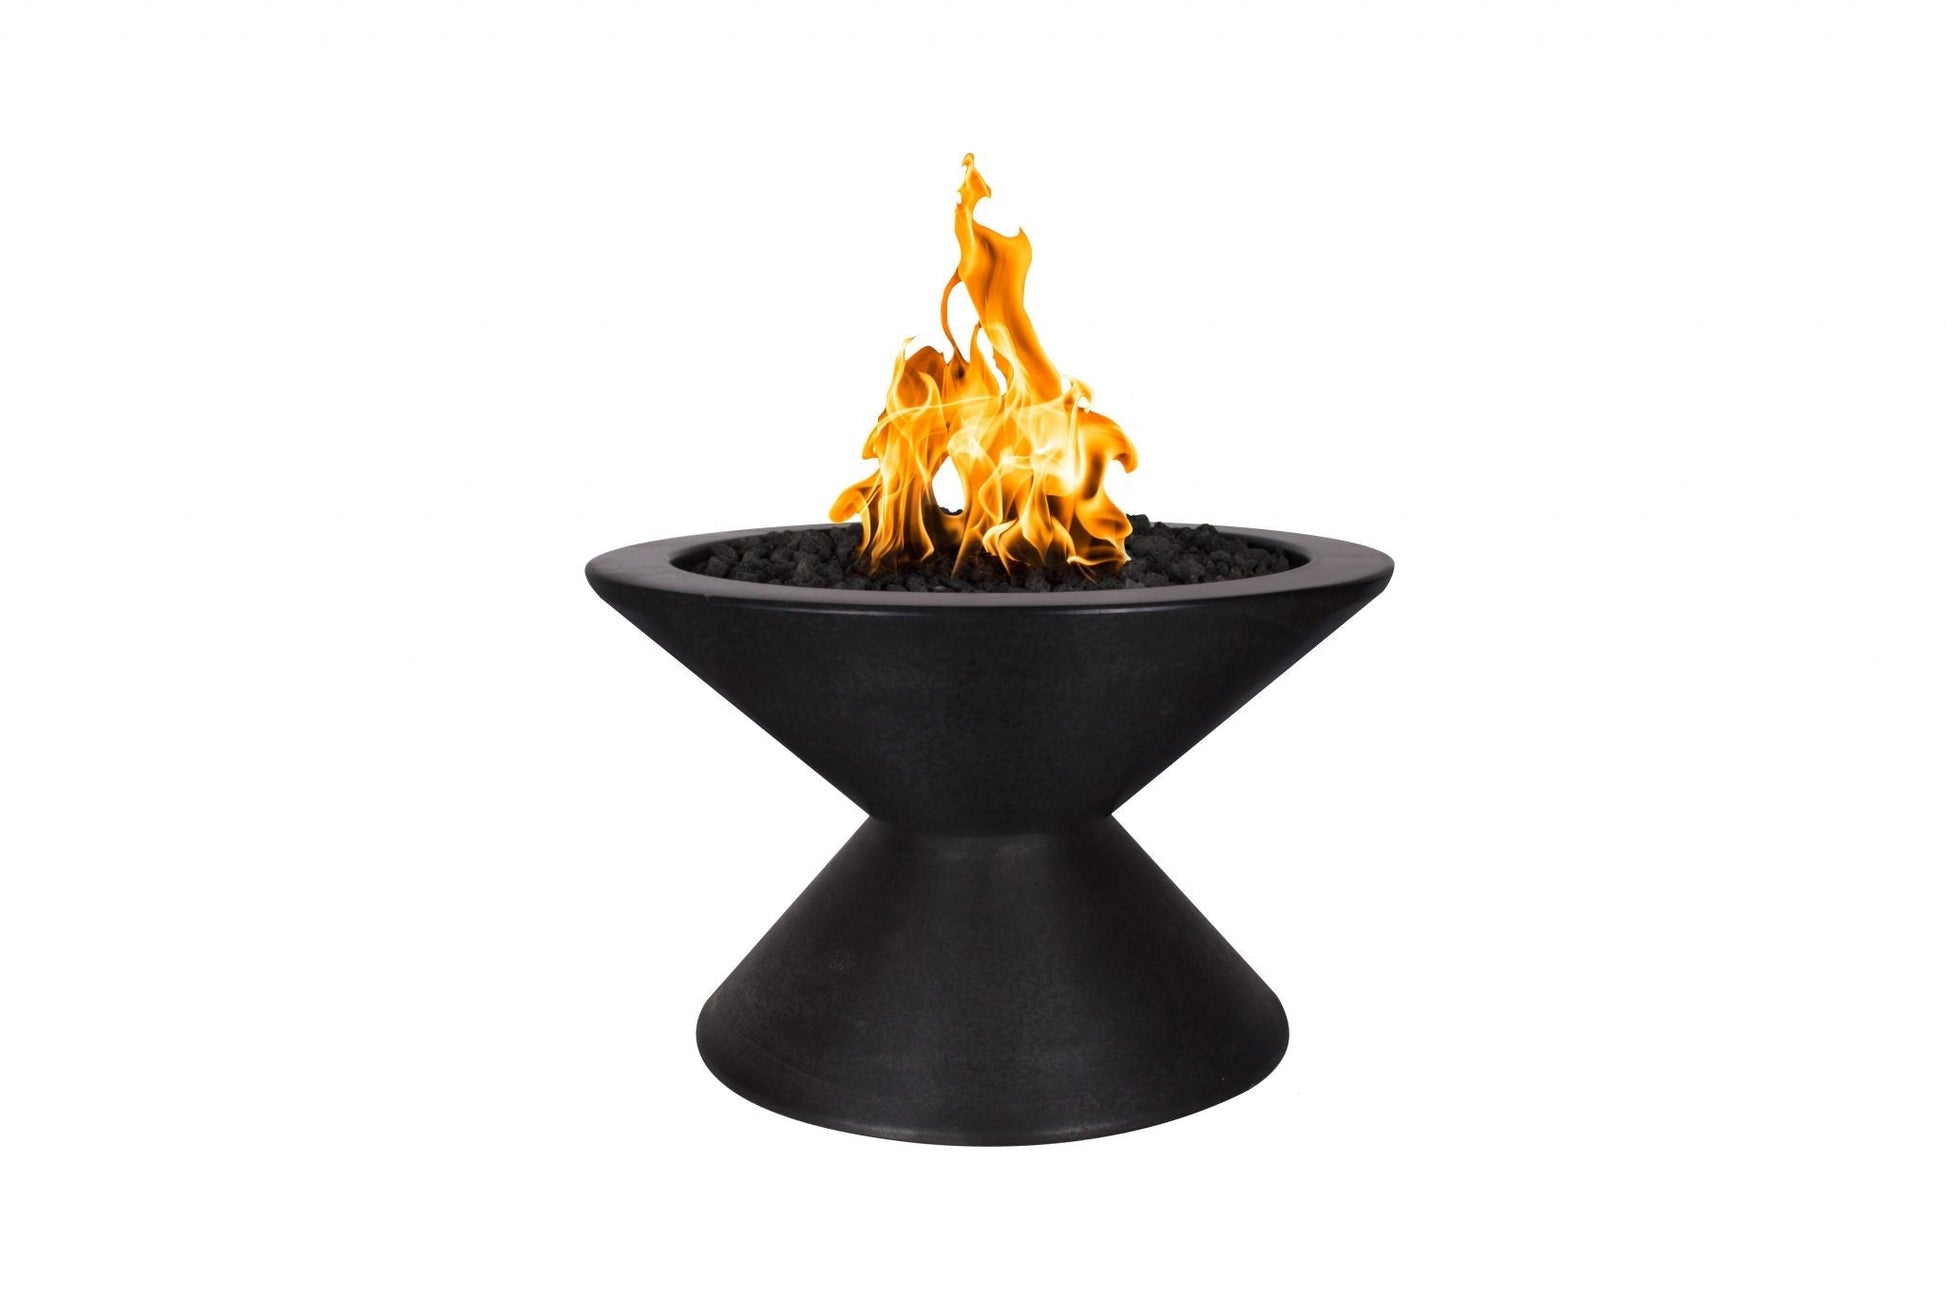 The Outdoor Plus Round Lucia 31" Rustic Moss Stone GFRC Concrete Liquid Propane Fire Pit with Match Lit Ignition